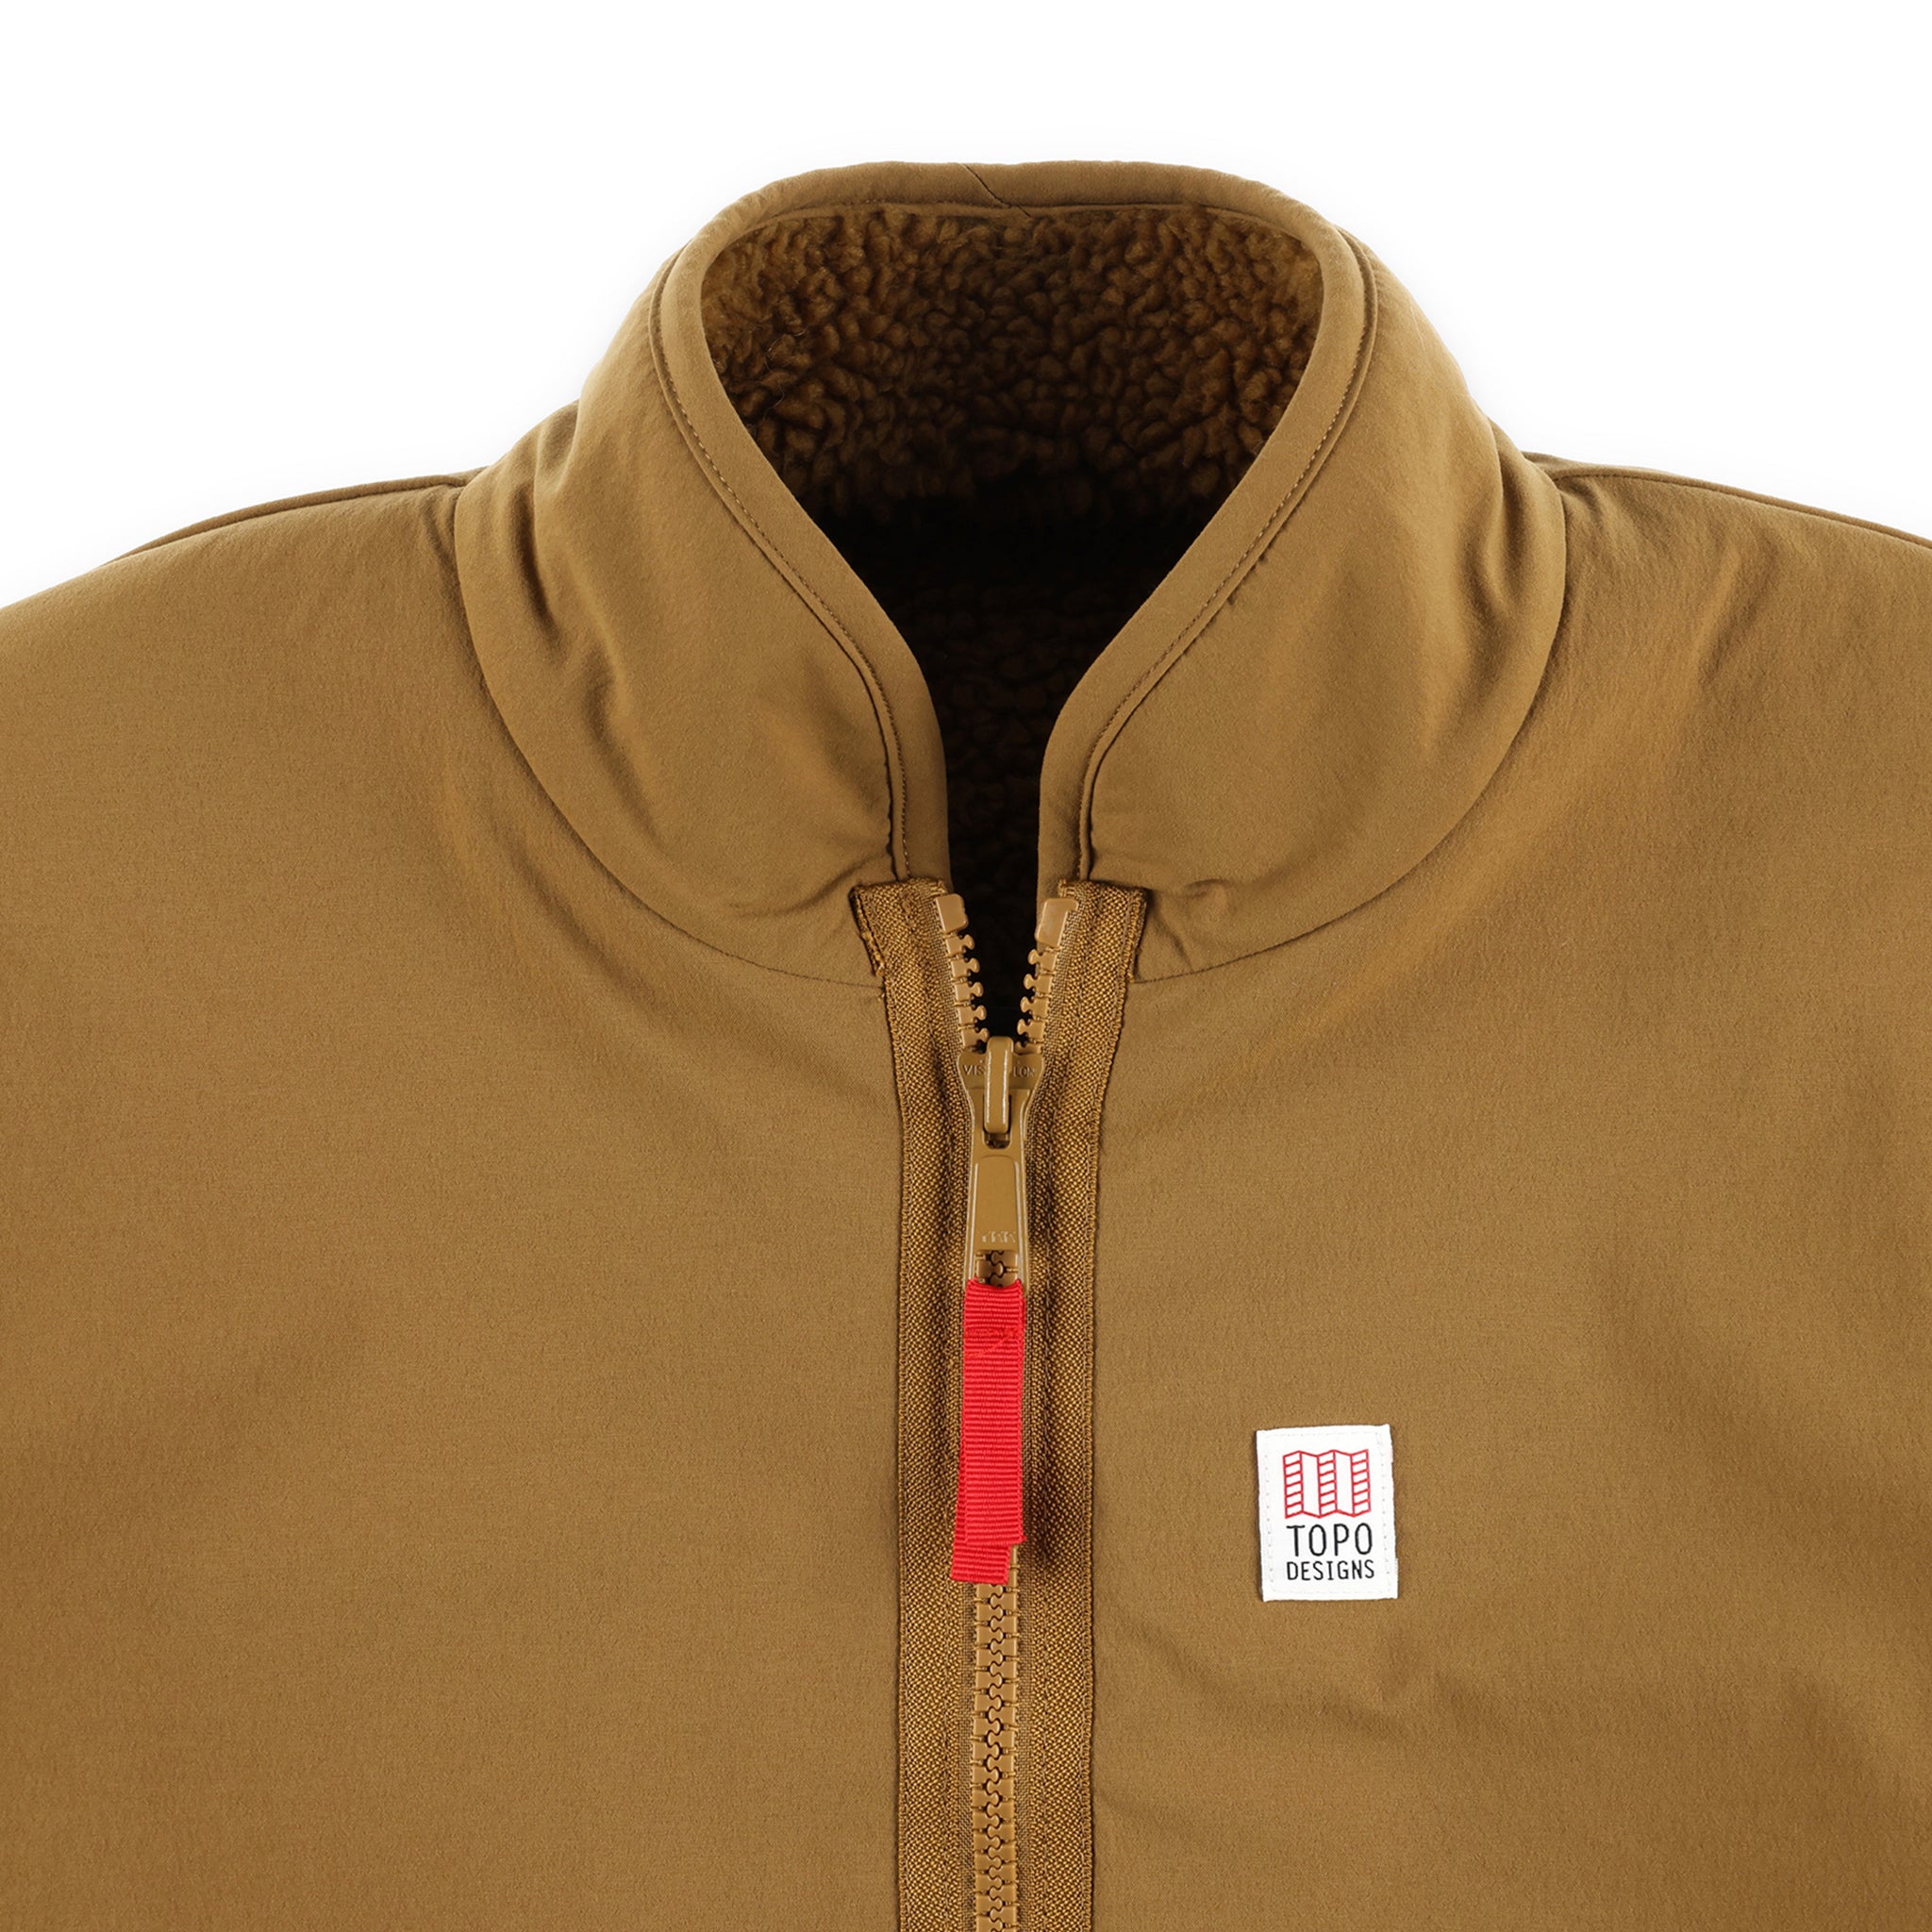 Detail shot of Topo Designs Men's Sherpa Jacket in "Dark Khaki" brown showing DWR side, collar, zipper, and chest logo patch.